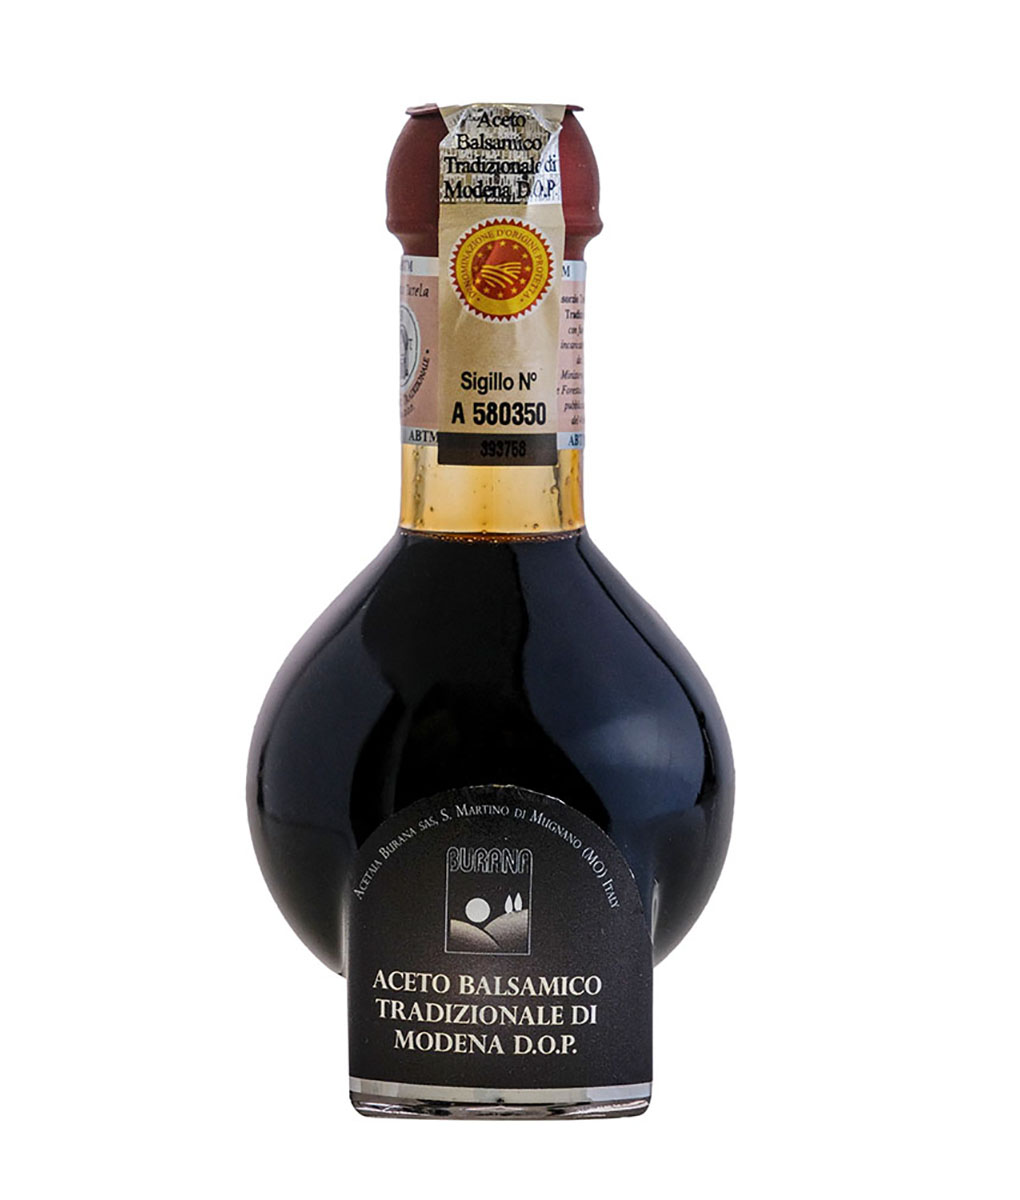 Traditional balsamic vinegar of Modena D.O.P 12 years